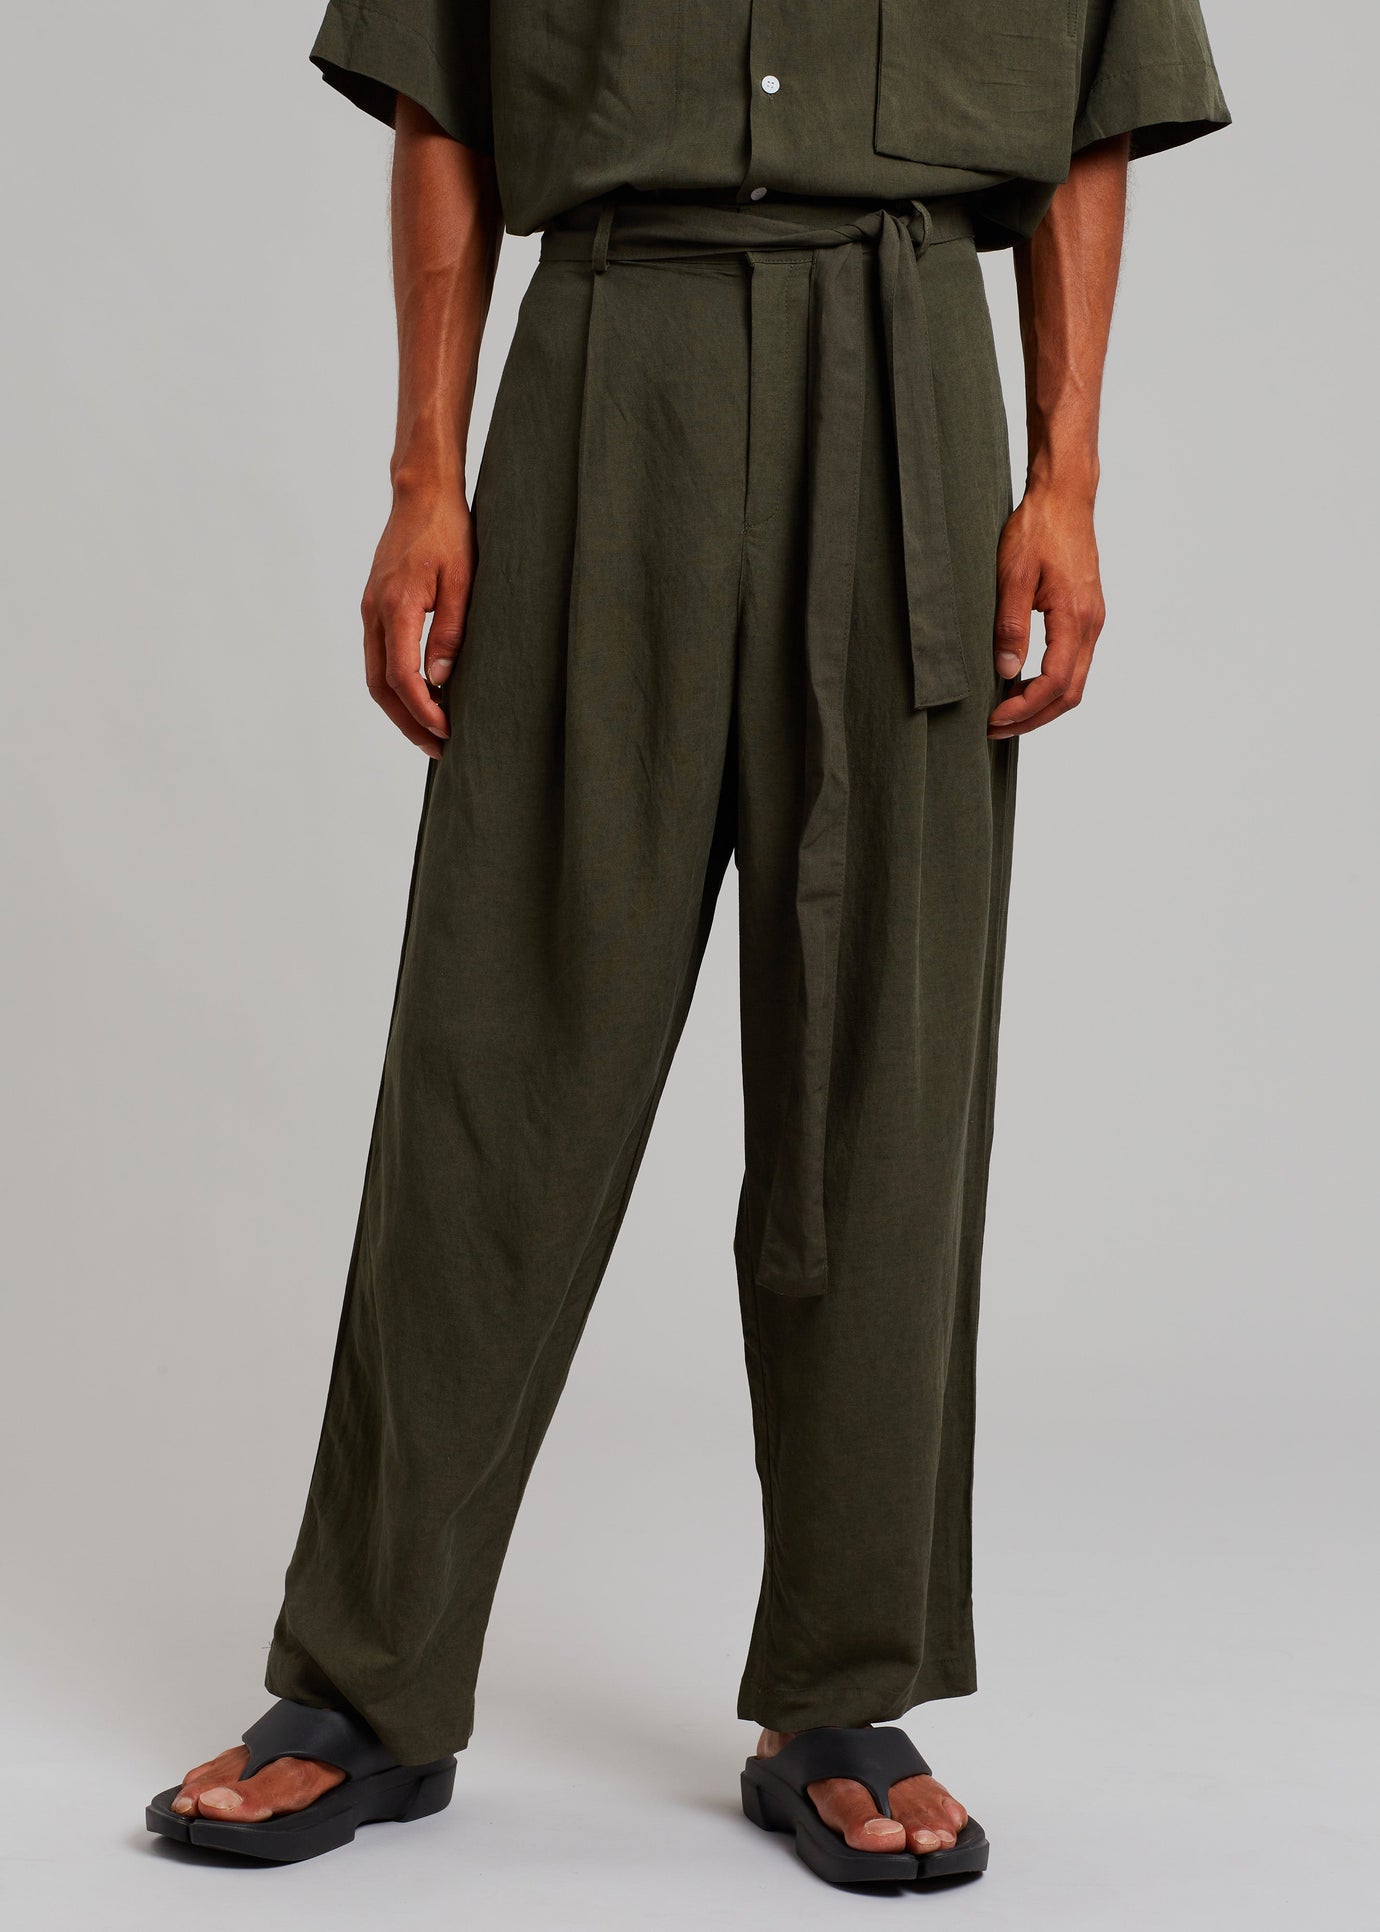 Georg Puch Pants - Olive